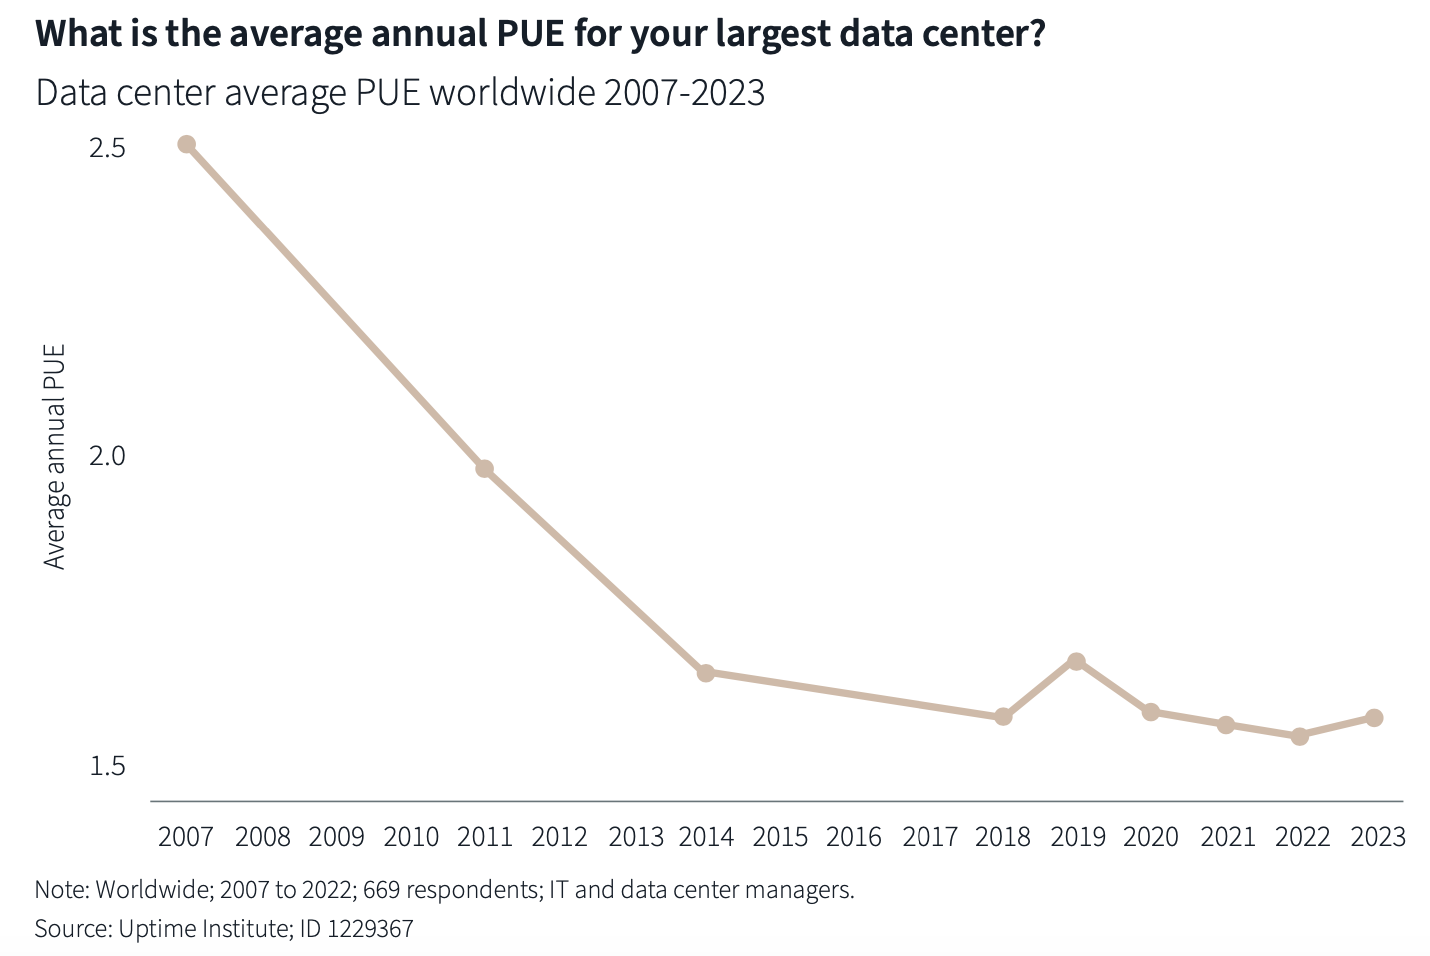 Power usage at data centers has been dropping